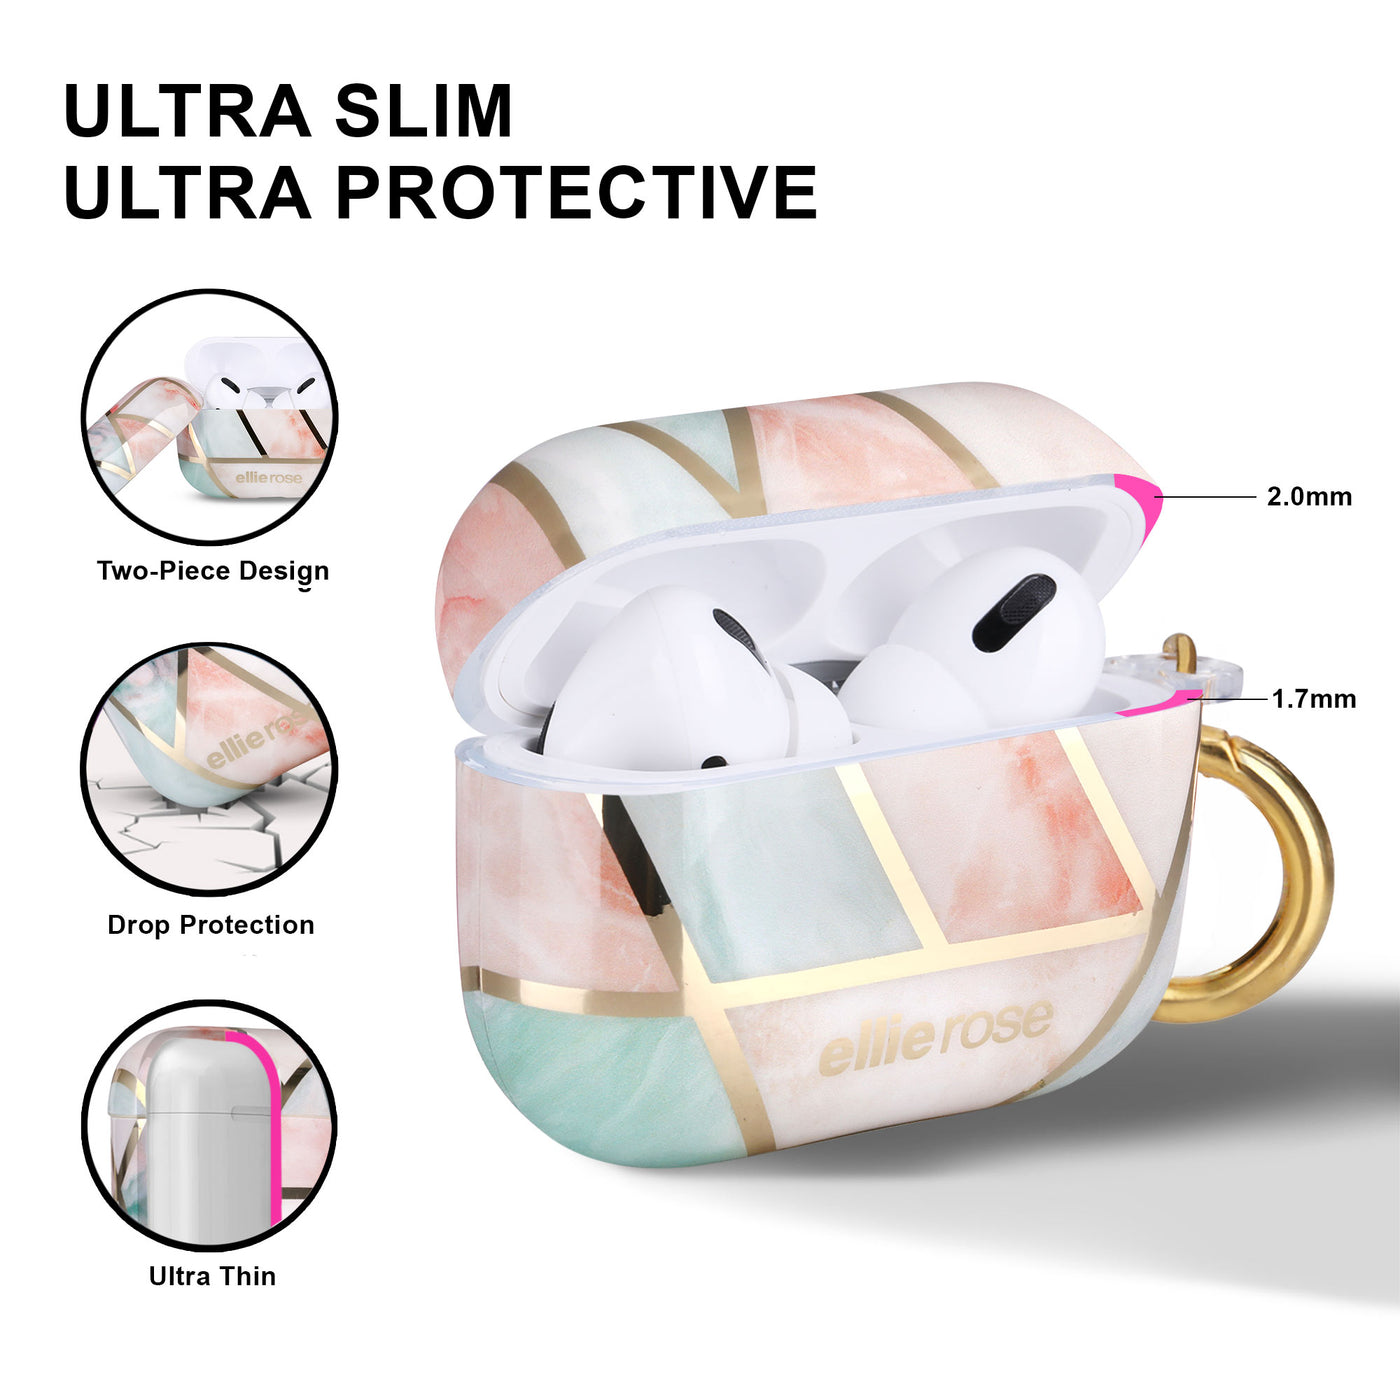 ultra slim, ultra protective, two piece design, and drop protection Peachy green airpods pro case